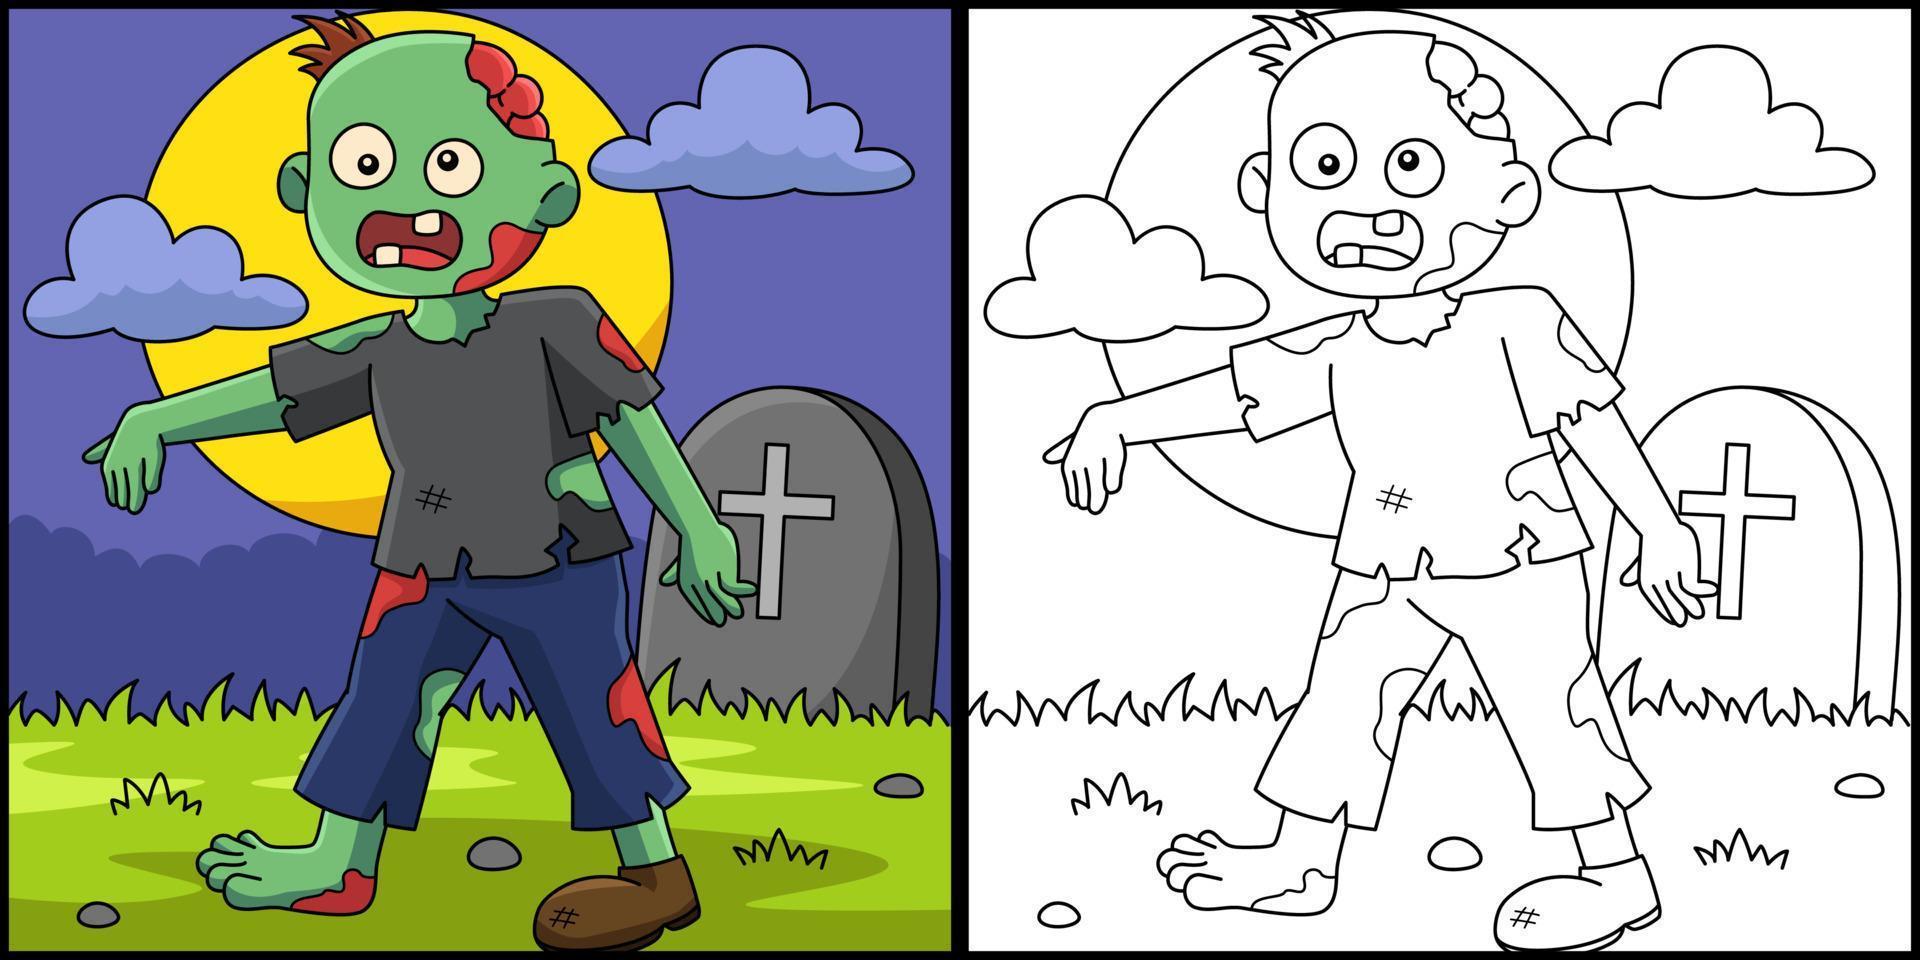 Zombie Halloween Coloring Page Illustration vector